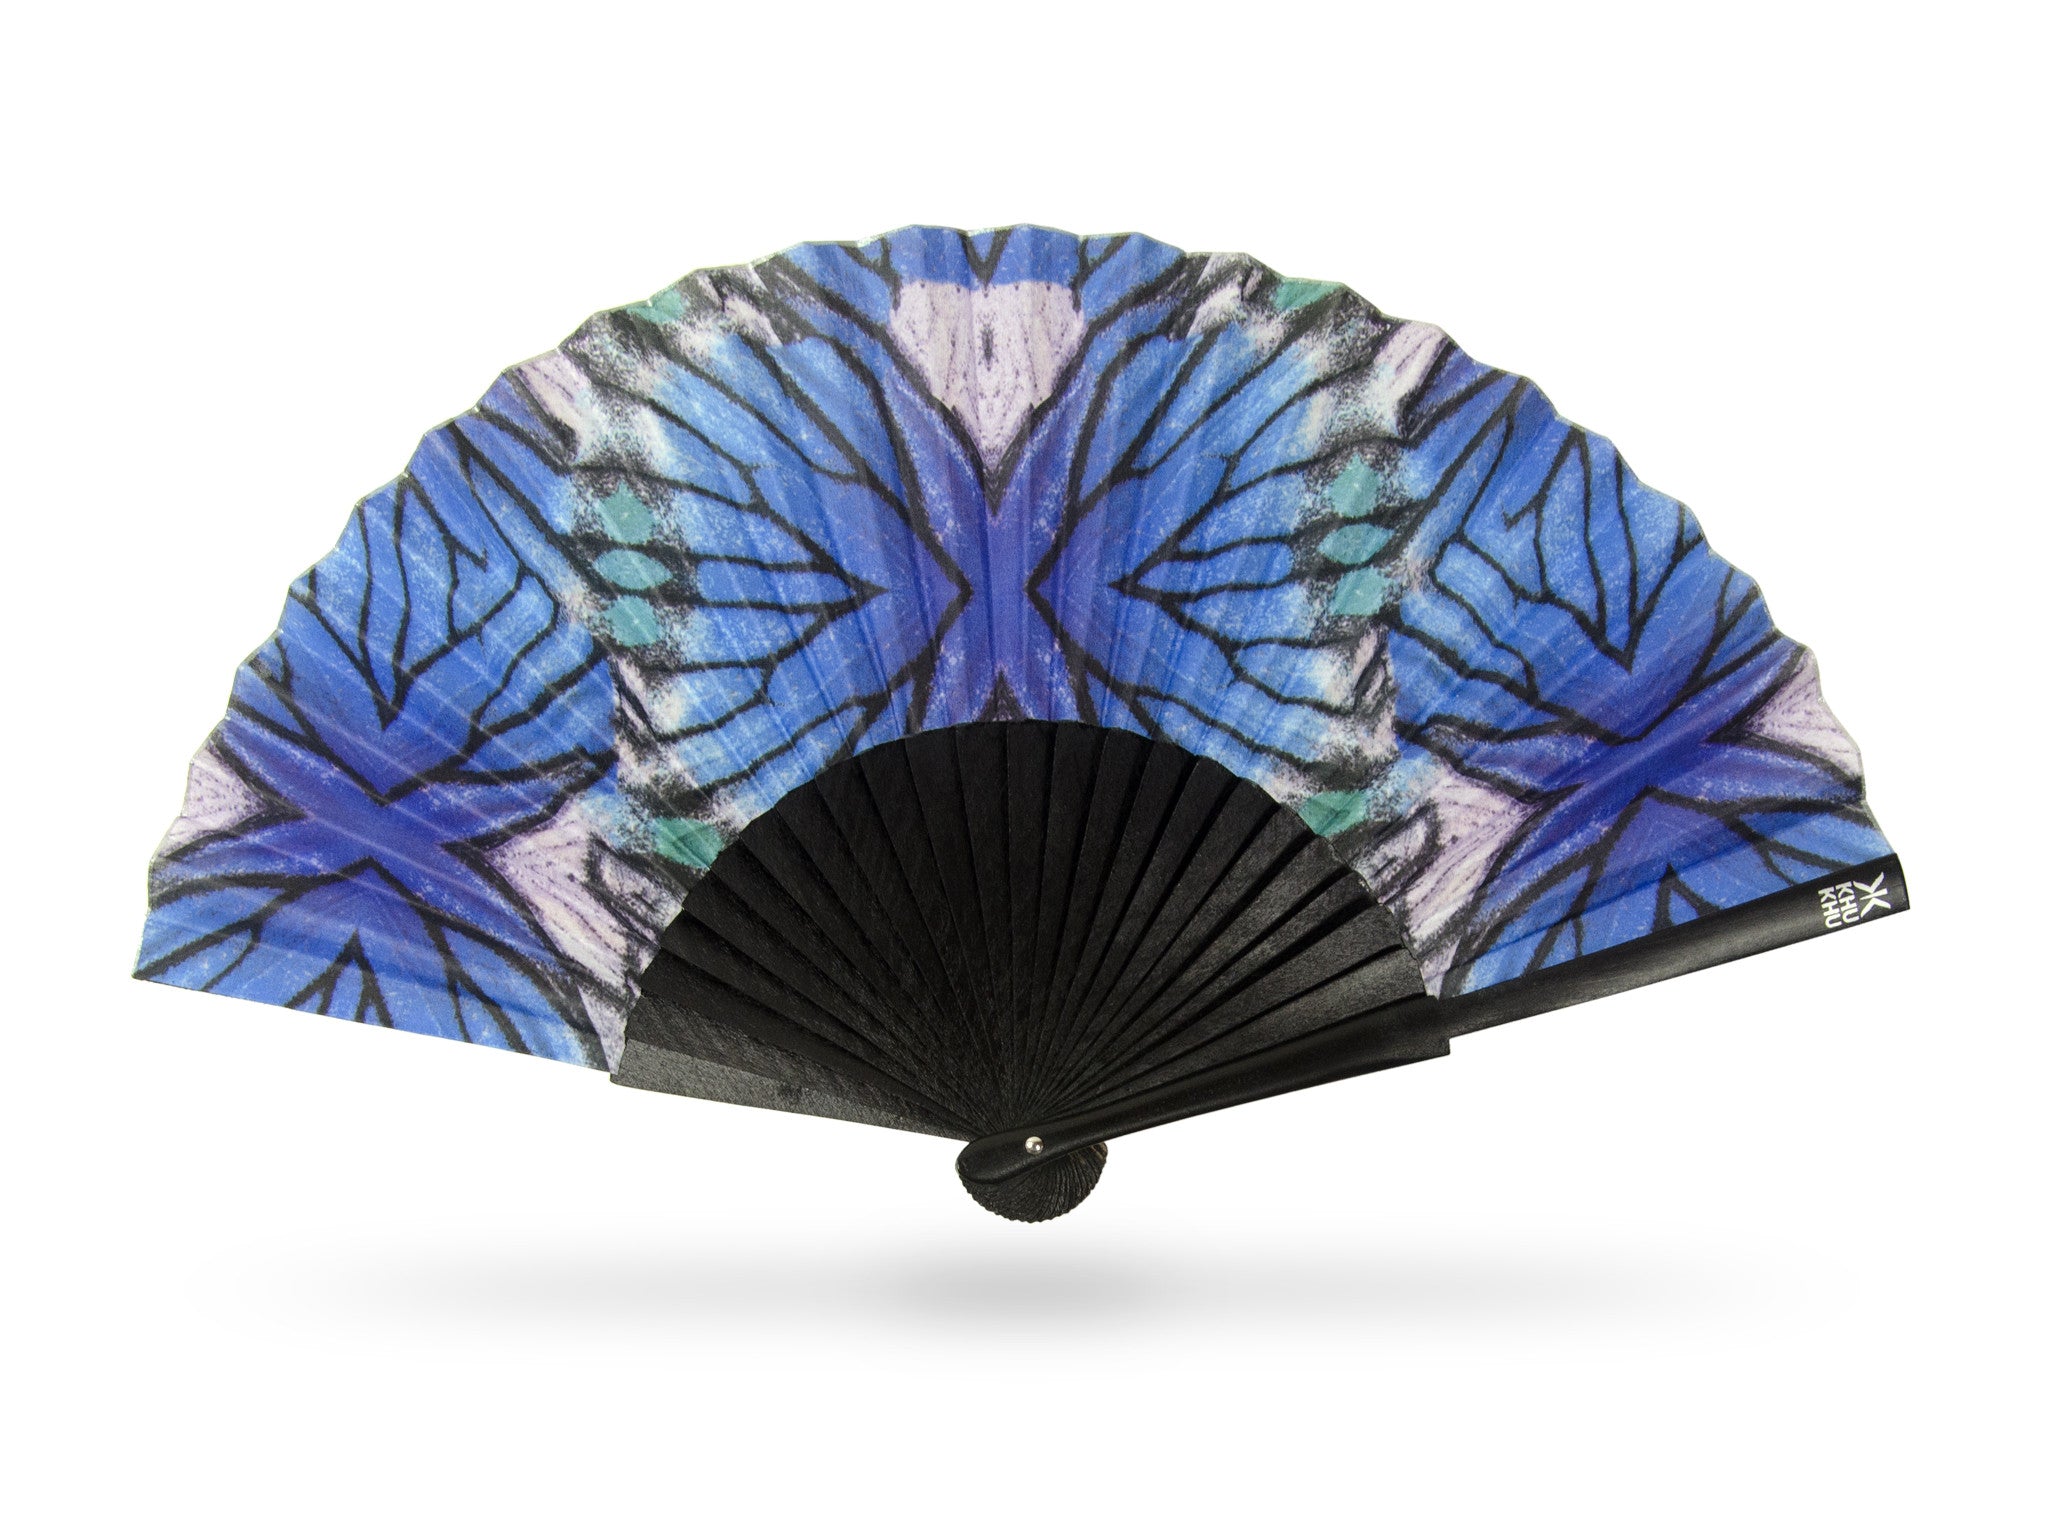 Khu Khu Blue Lyca Beautiful Butterfly print hand-fan with geometric symmetrical close up of butterfly wing in blue, turquoise and black with black wooden sticks.